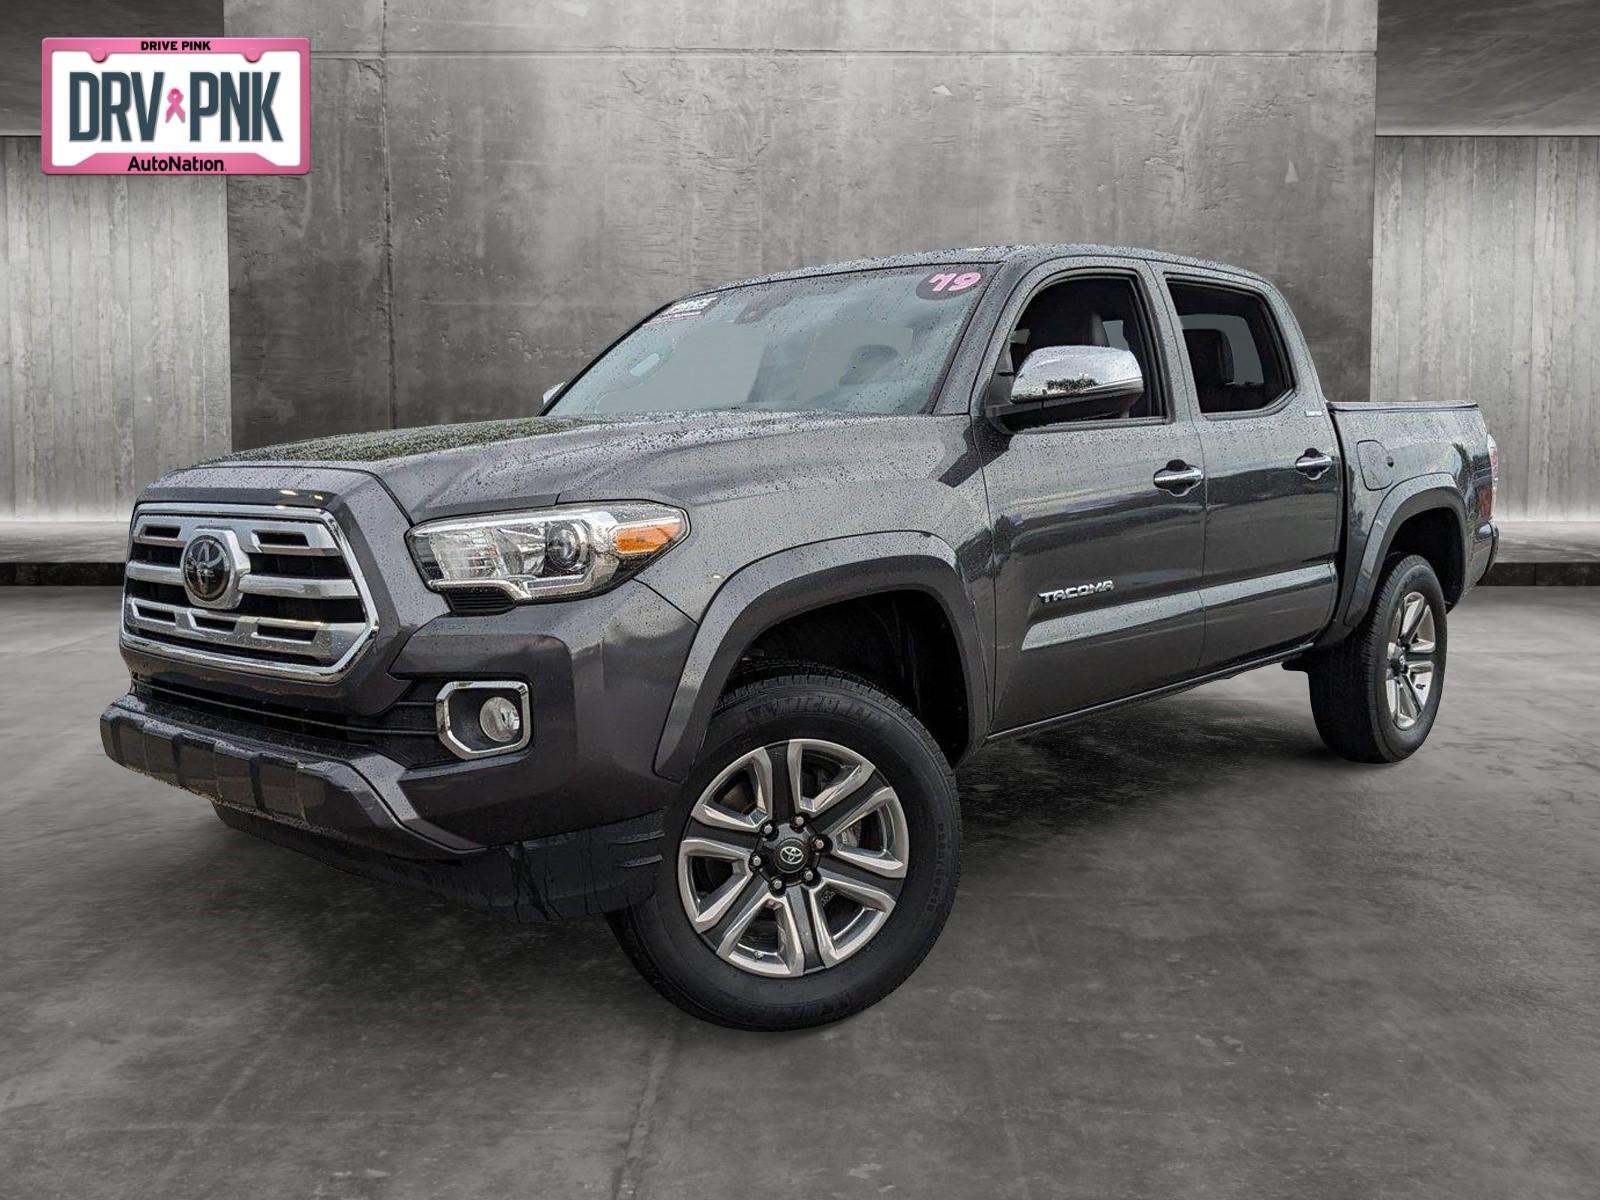 2019 Toyota Tacoma 4WD Vehicle Photo in Winter Park, FL 32792